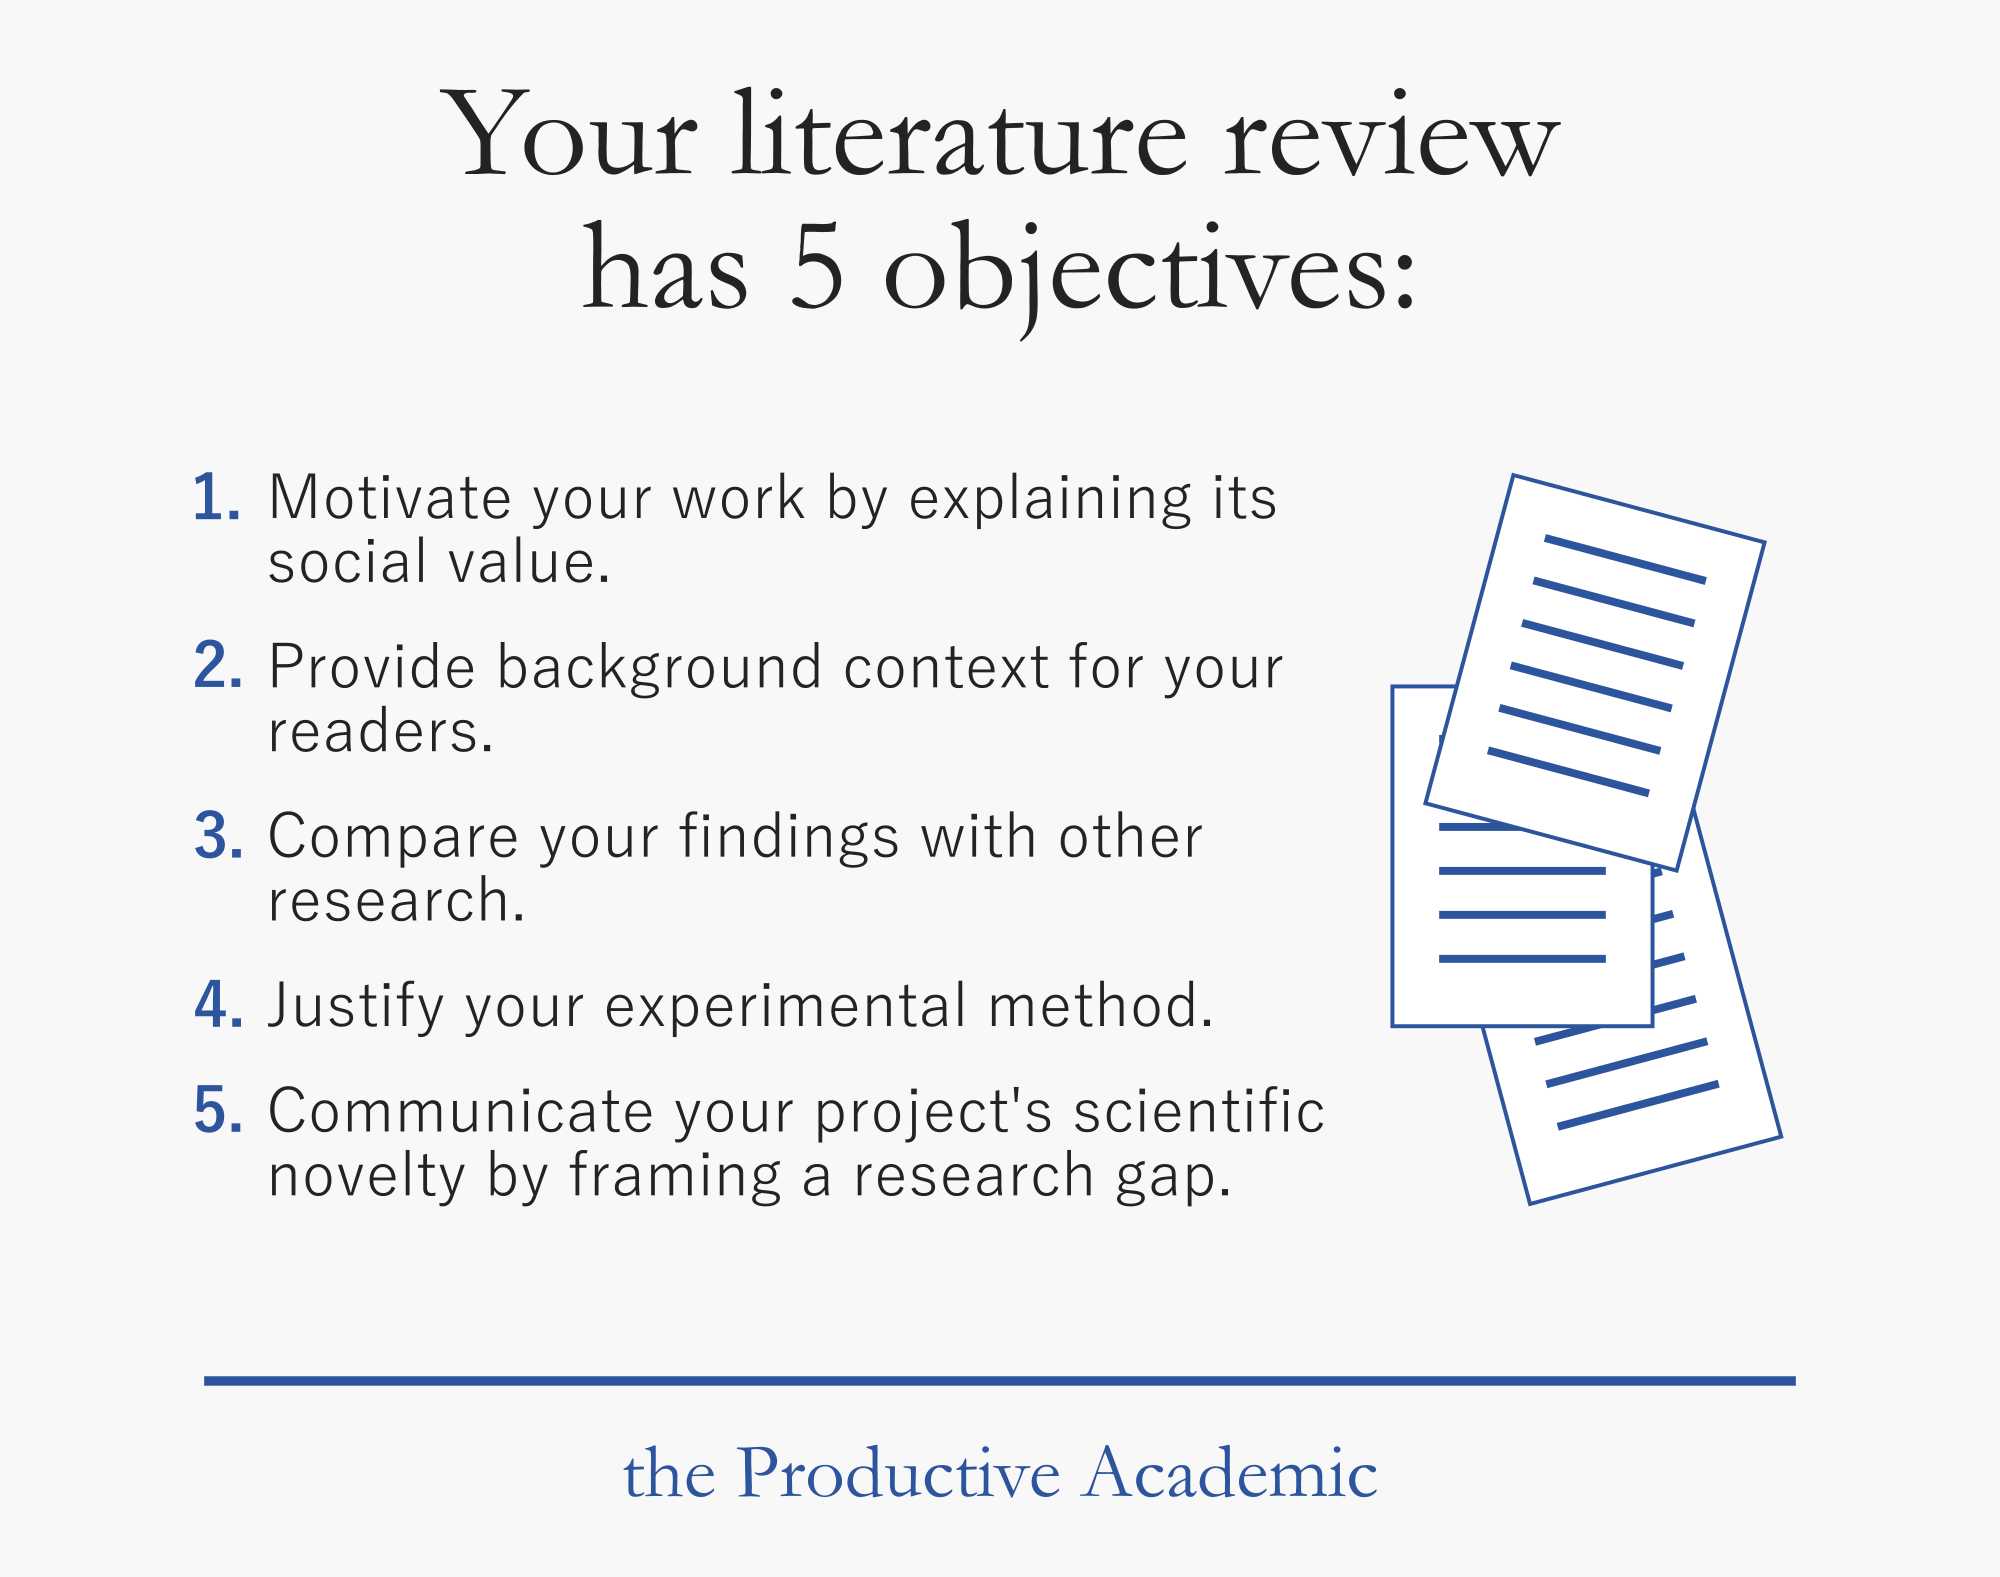 a literature review is not